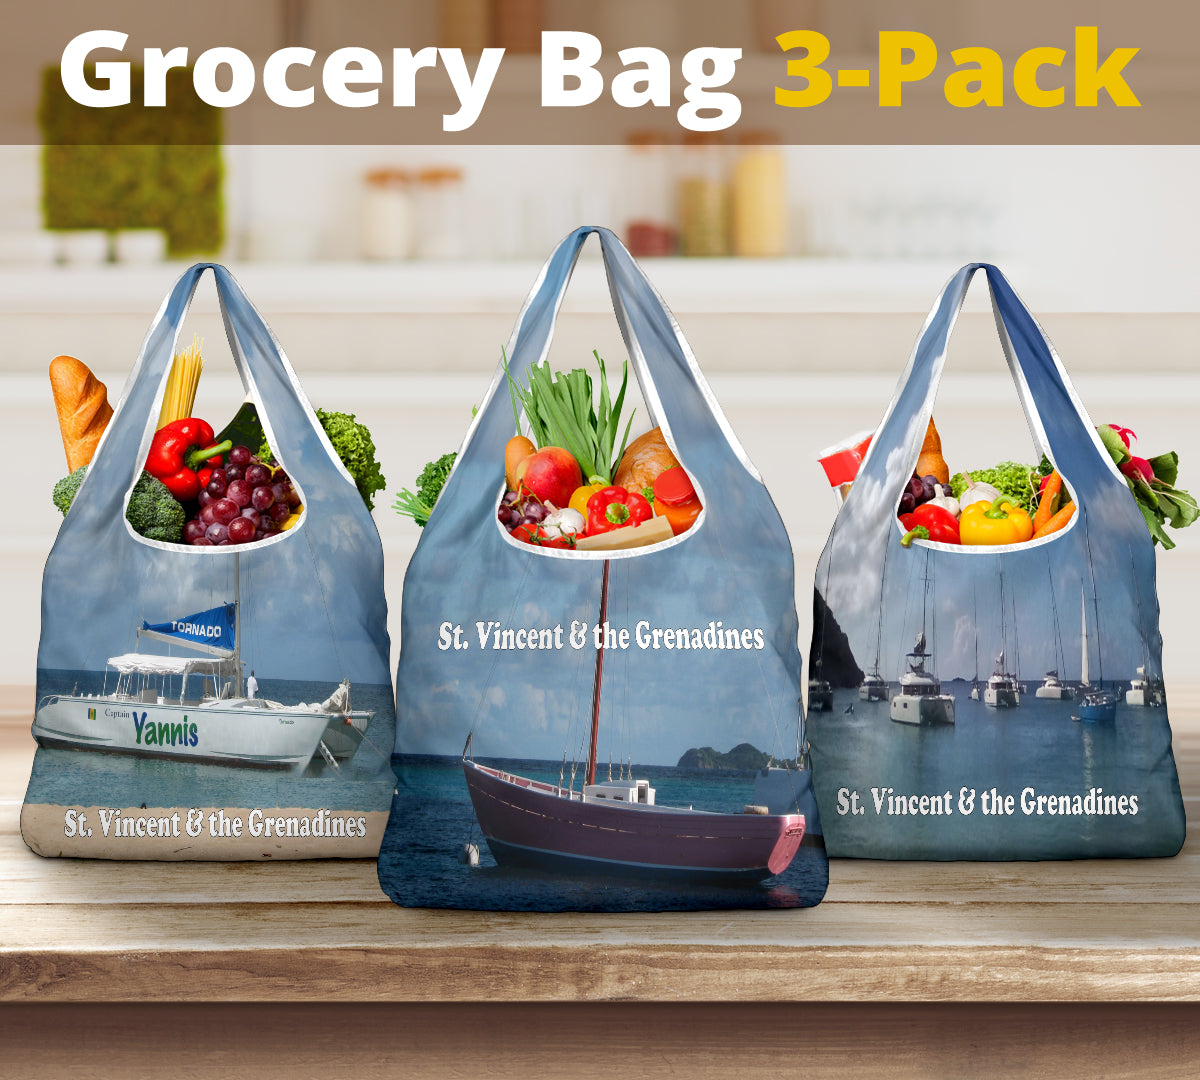 pack of 3 grocery bags featuring photographs of small water vessels docked in the waters of St. Vincent and the Grenadines